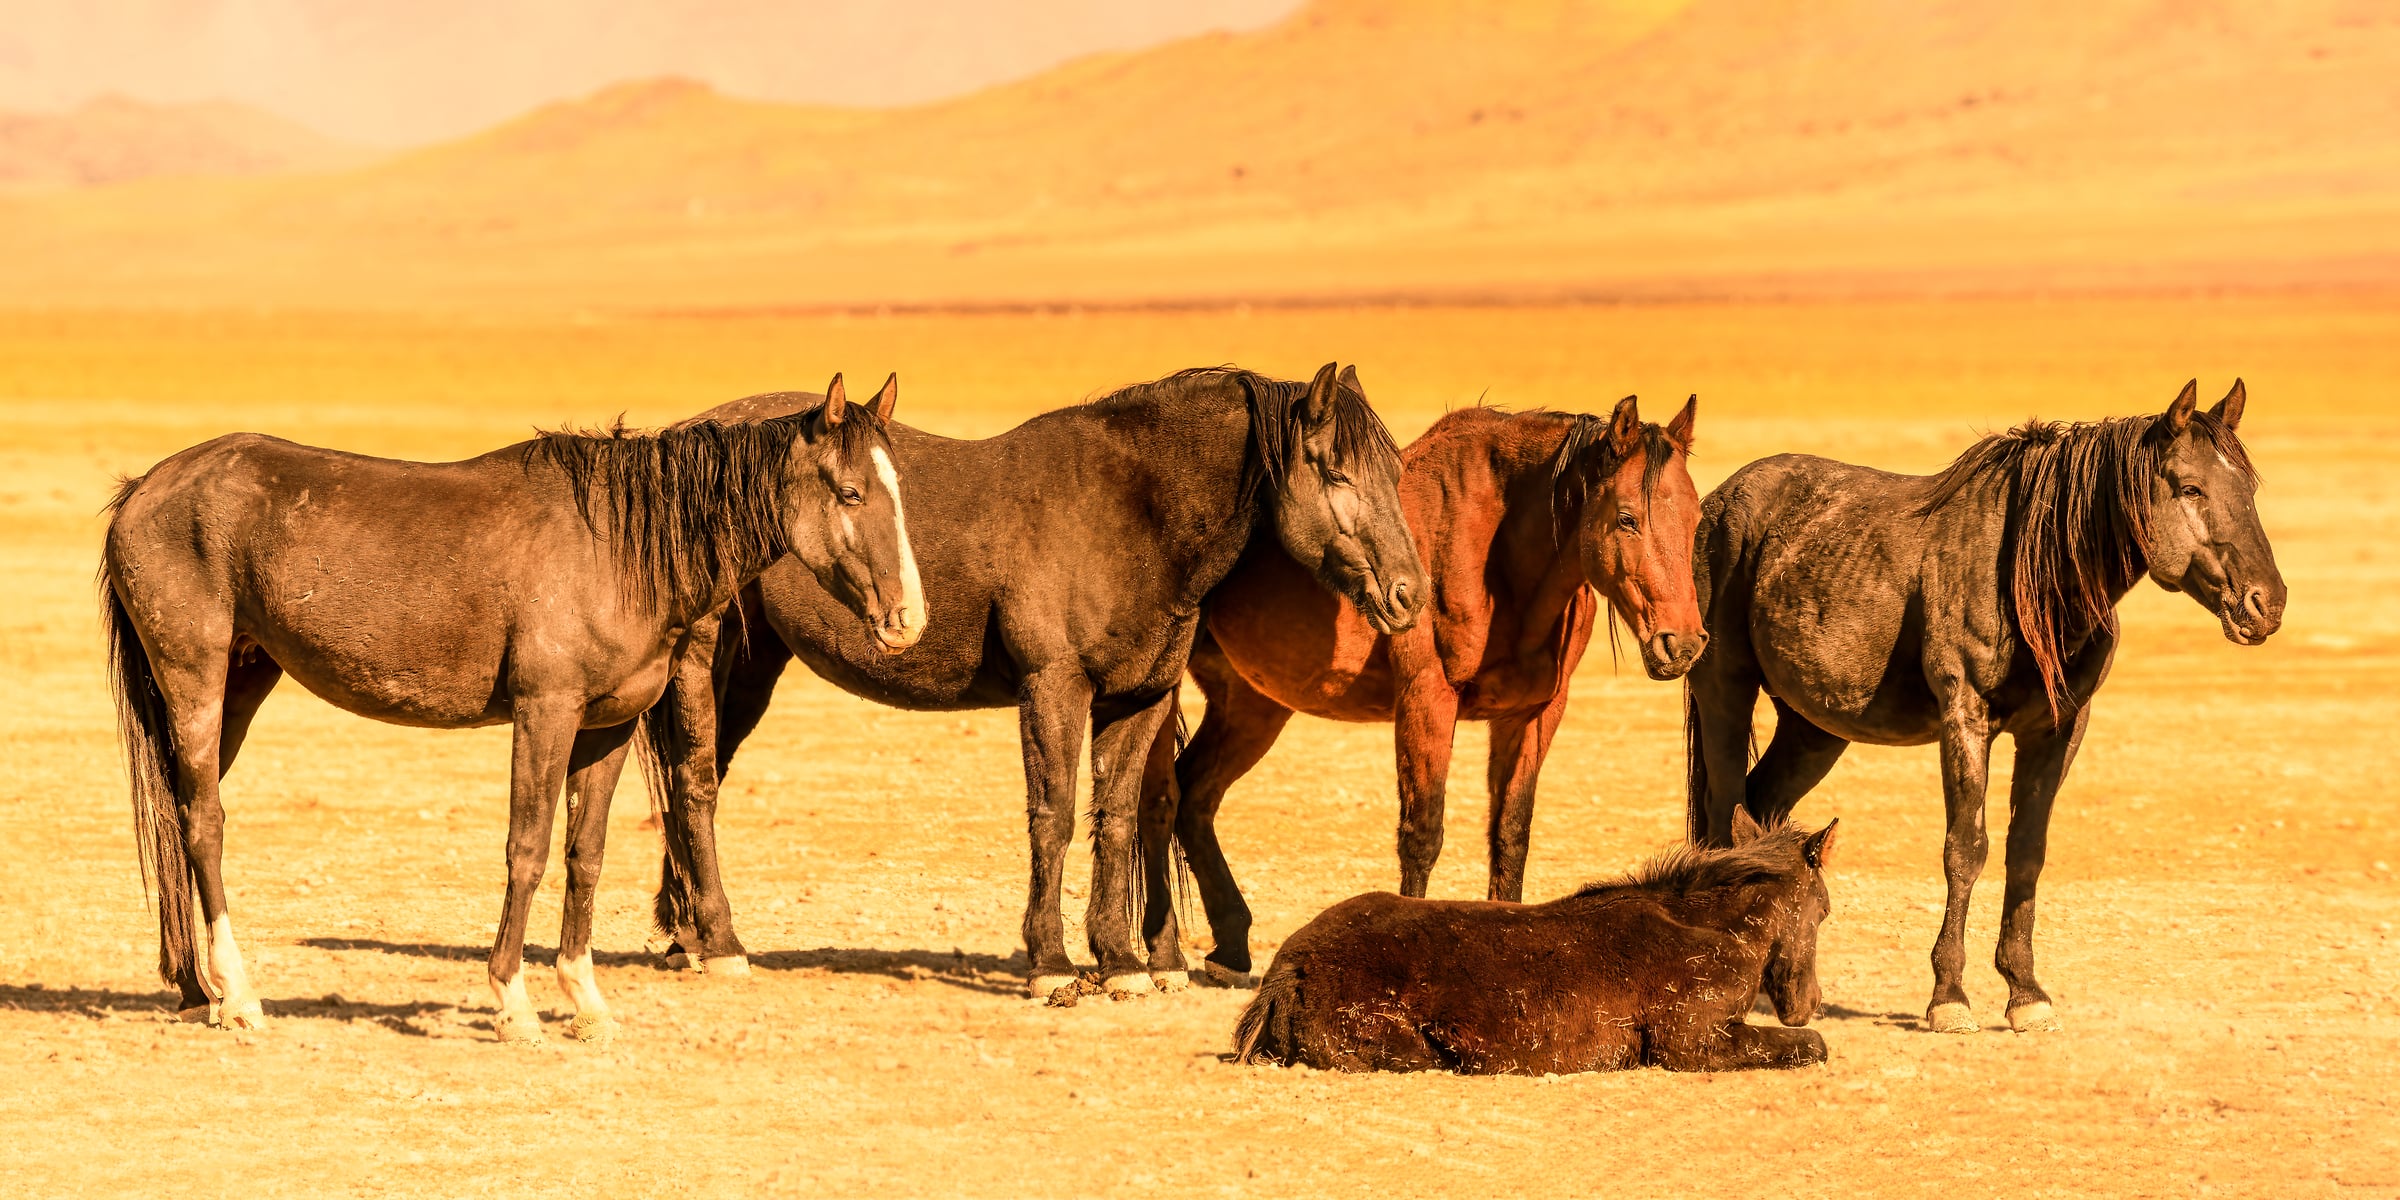 196 megapixels! A very high resolution, large format VAST photo print of a group of horses standing in a desert; fine art photograph created by David David in Dugway Valley, Utah.